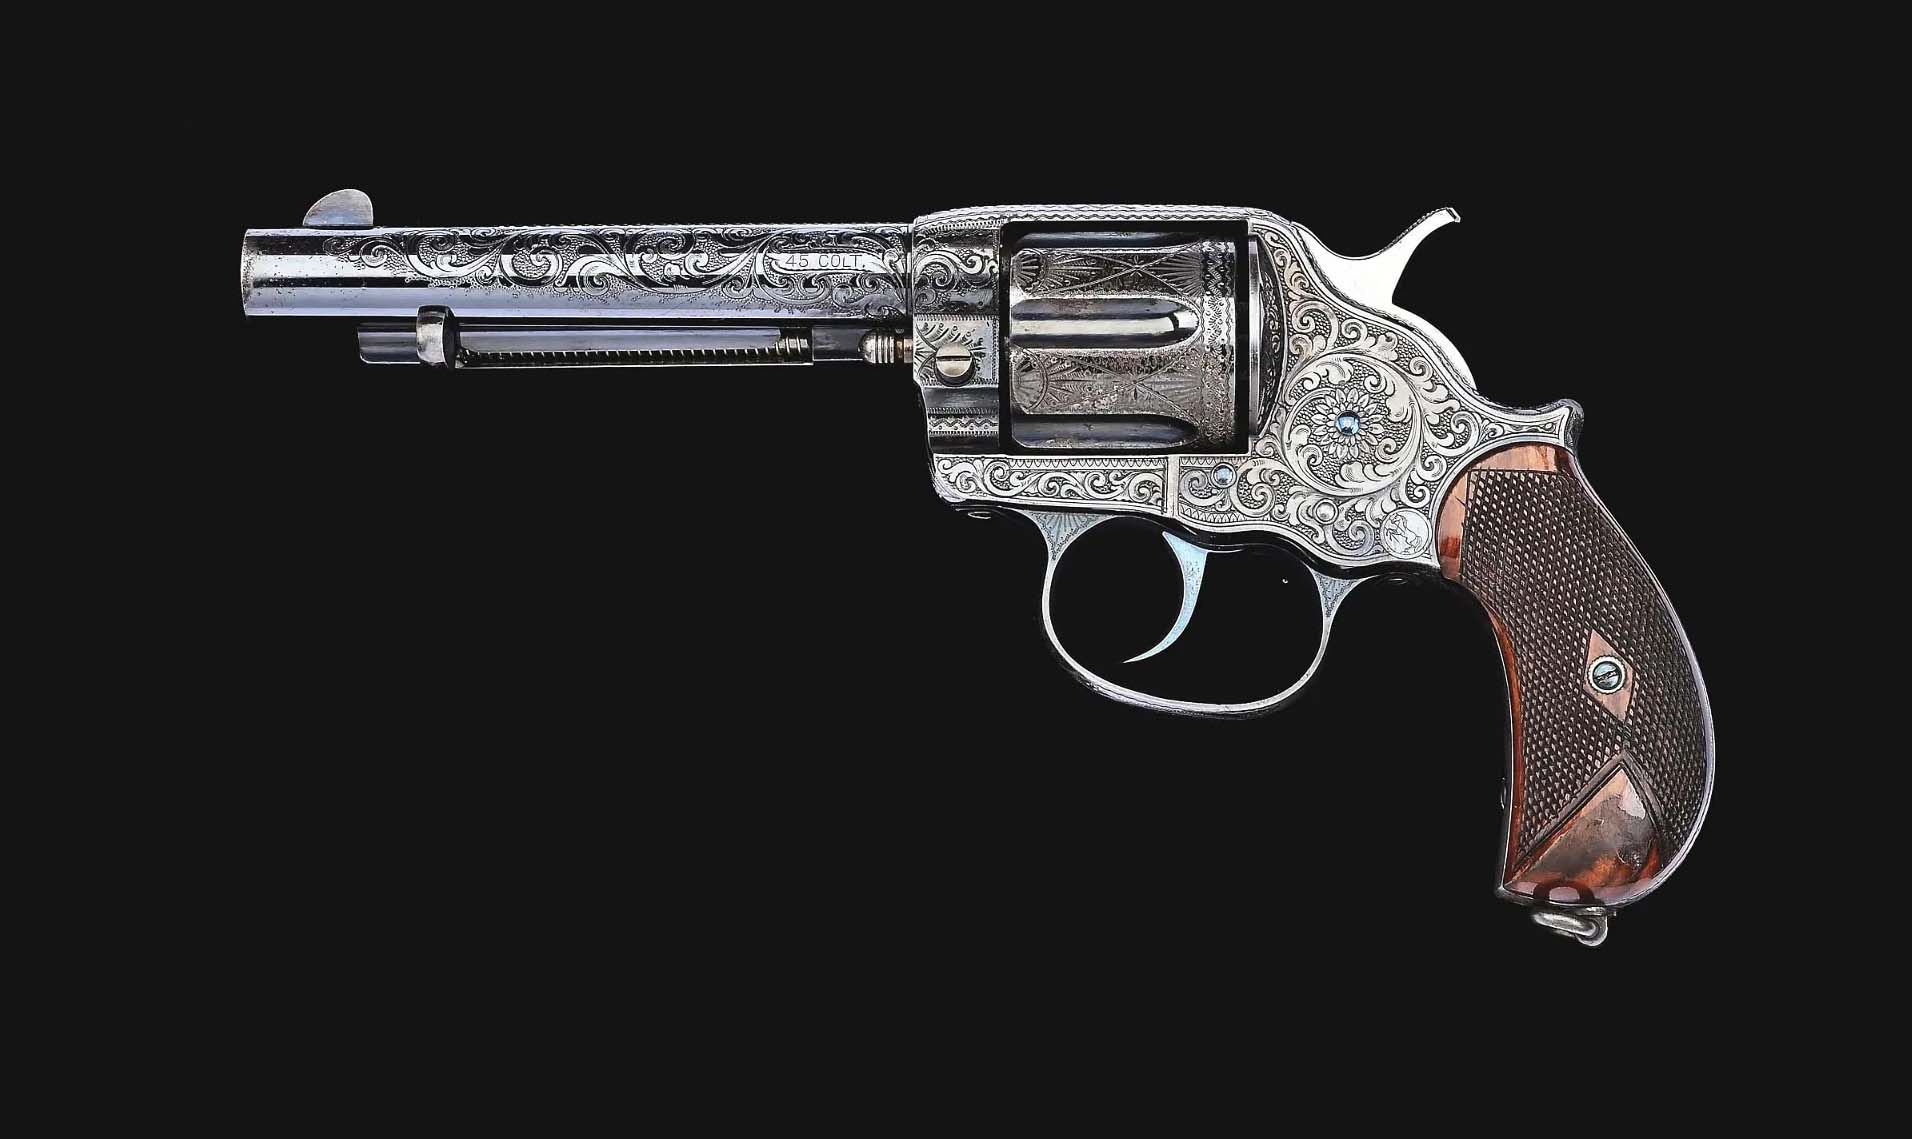 Colt .45 with a 5.5in barrel, which sold for $95,000 ($121,600 with buyer’s premium) at Morphy Auctions.